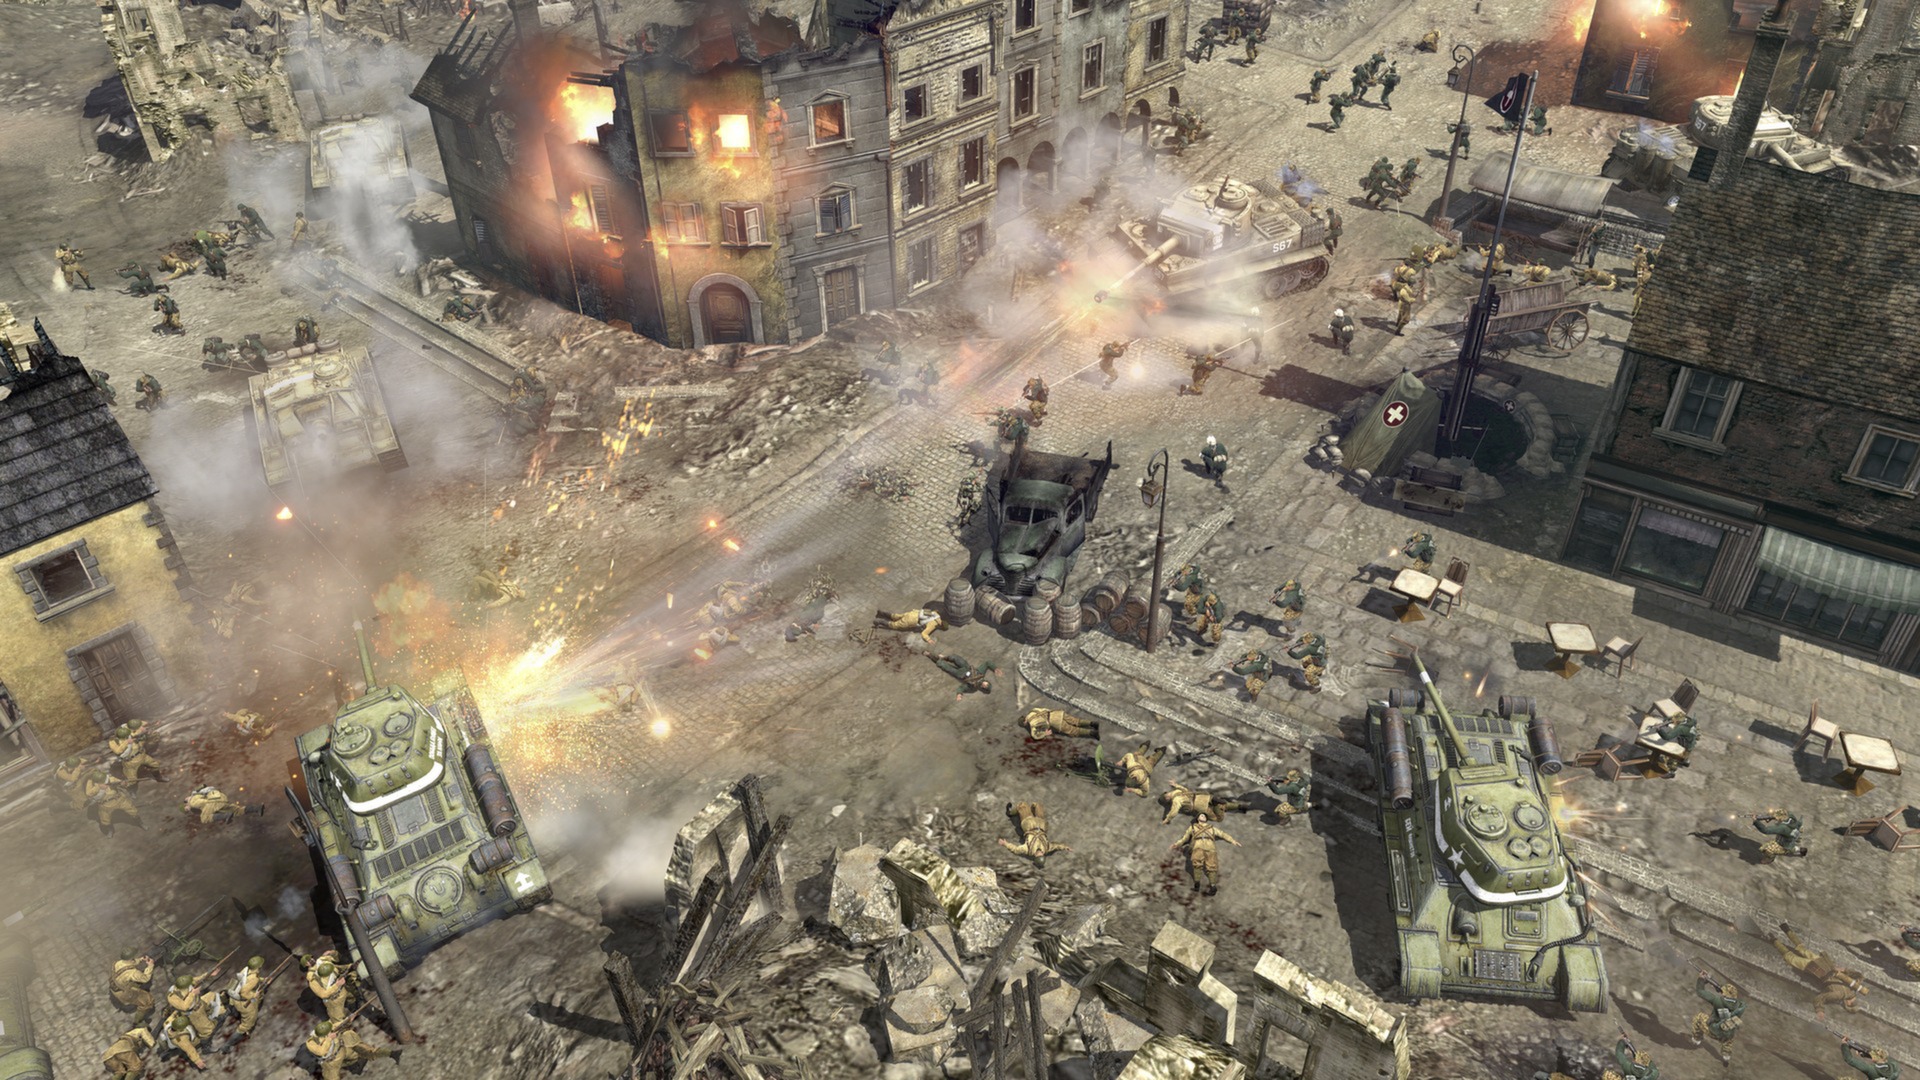 Company Of Heroes 2 Trainers Download Free